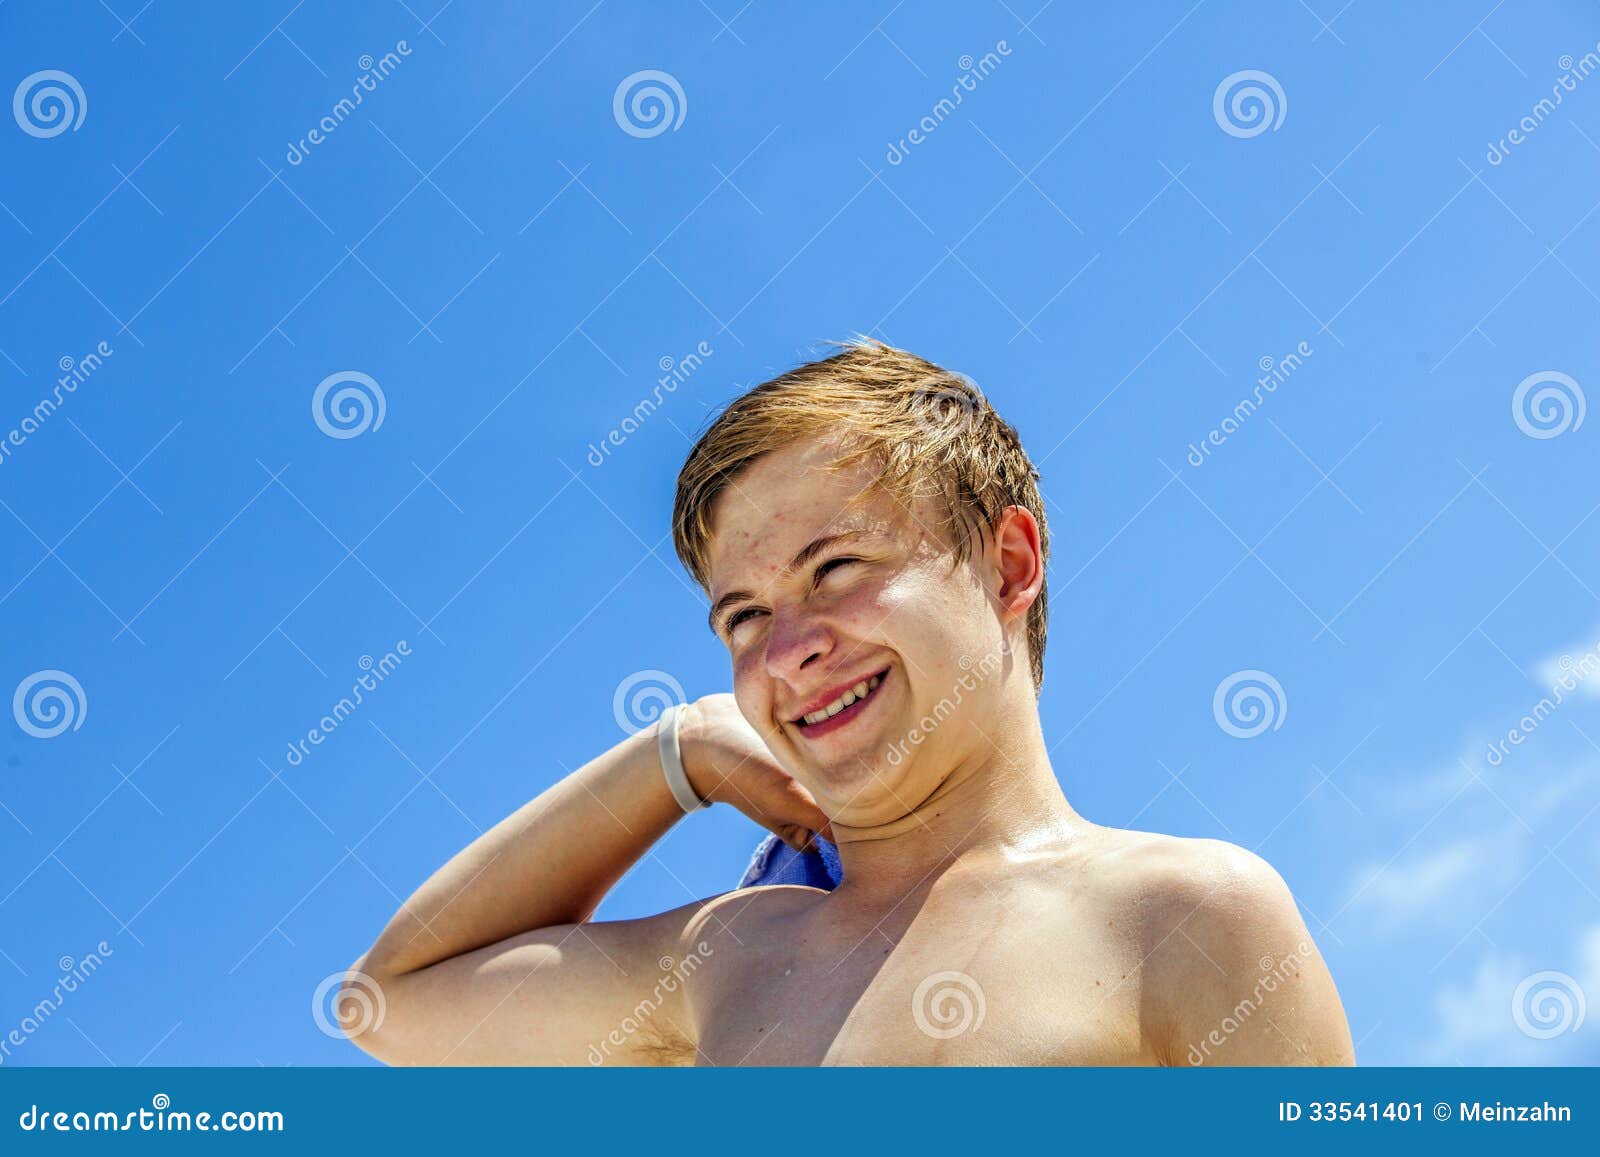 Happy Boy after Swimming at the Beach Stock Image - Image of looking ...